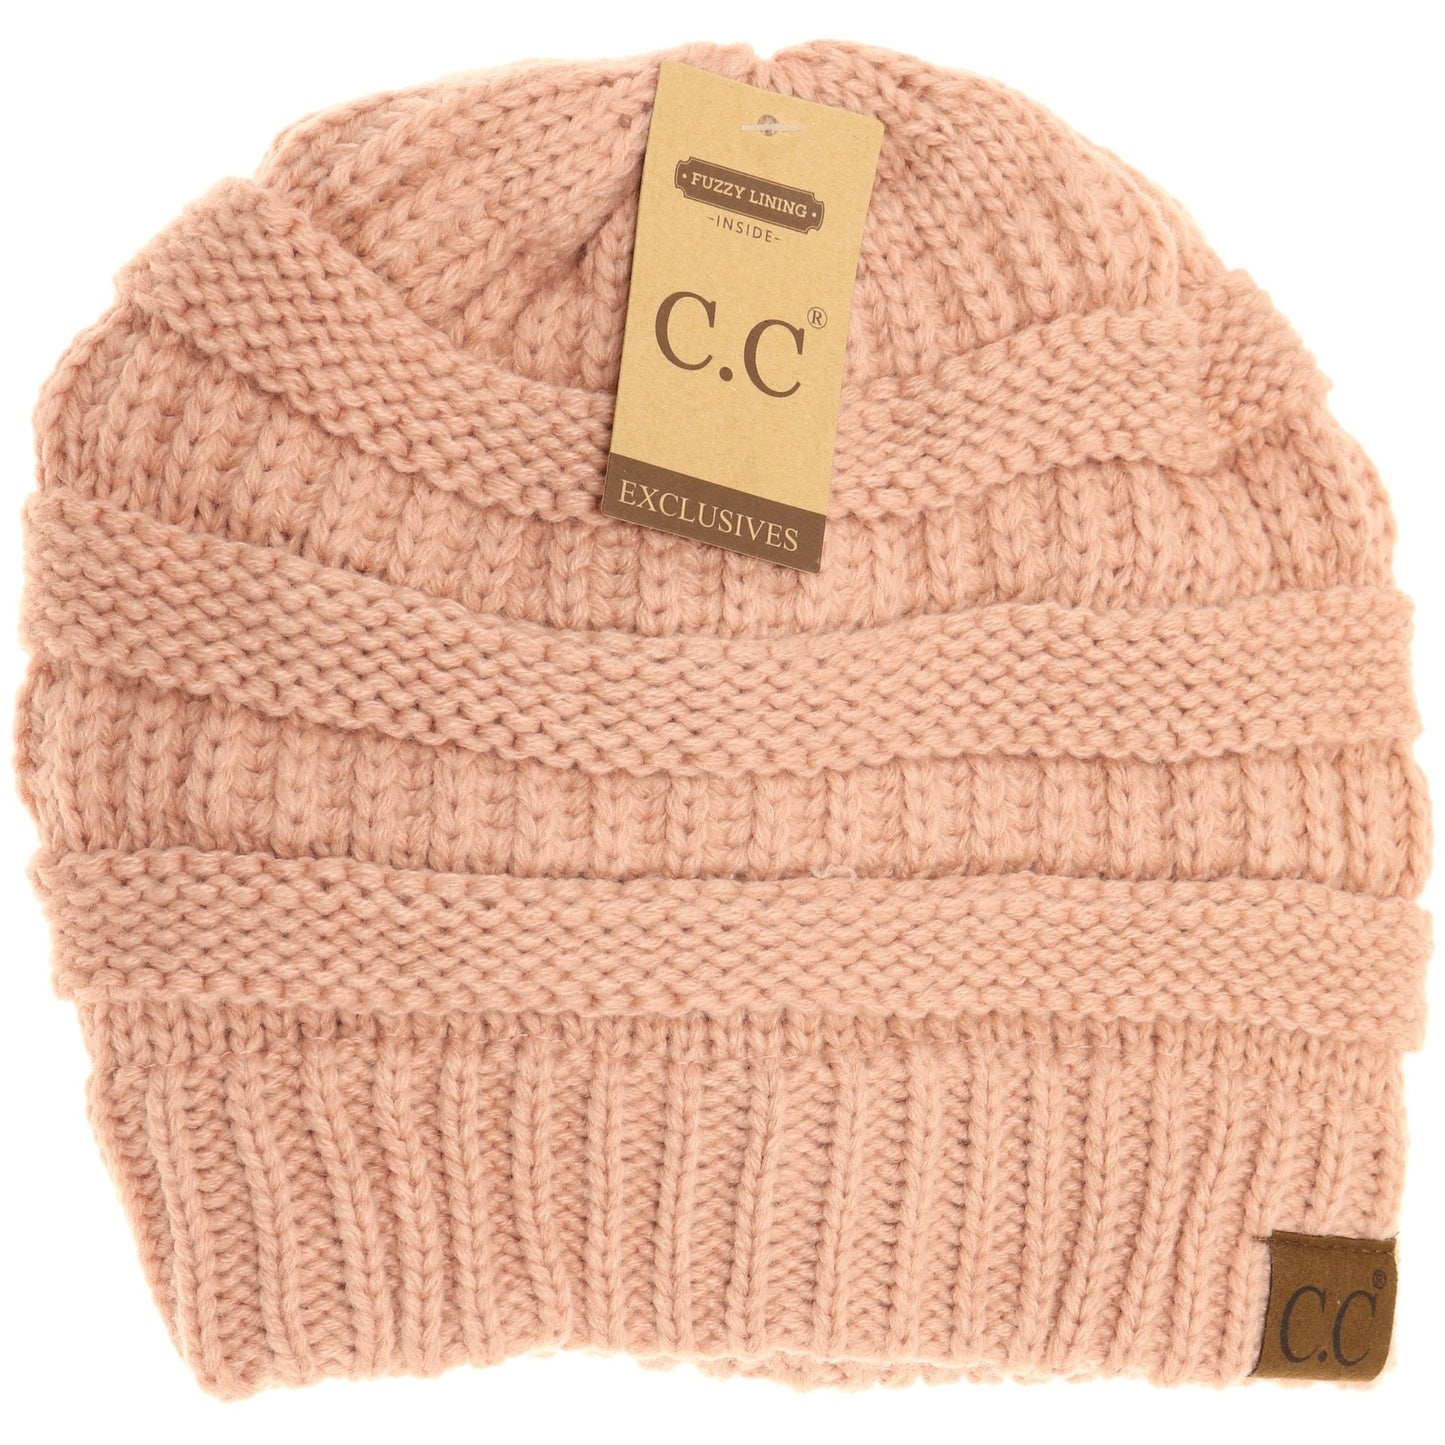 C.C Adult Classic Fuzzy Lined Beanie